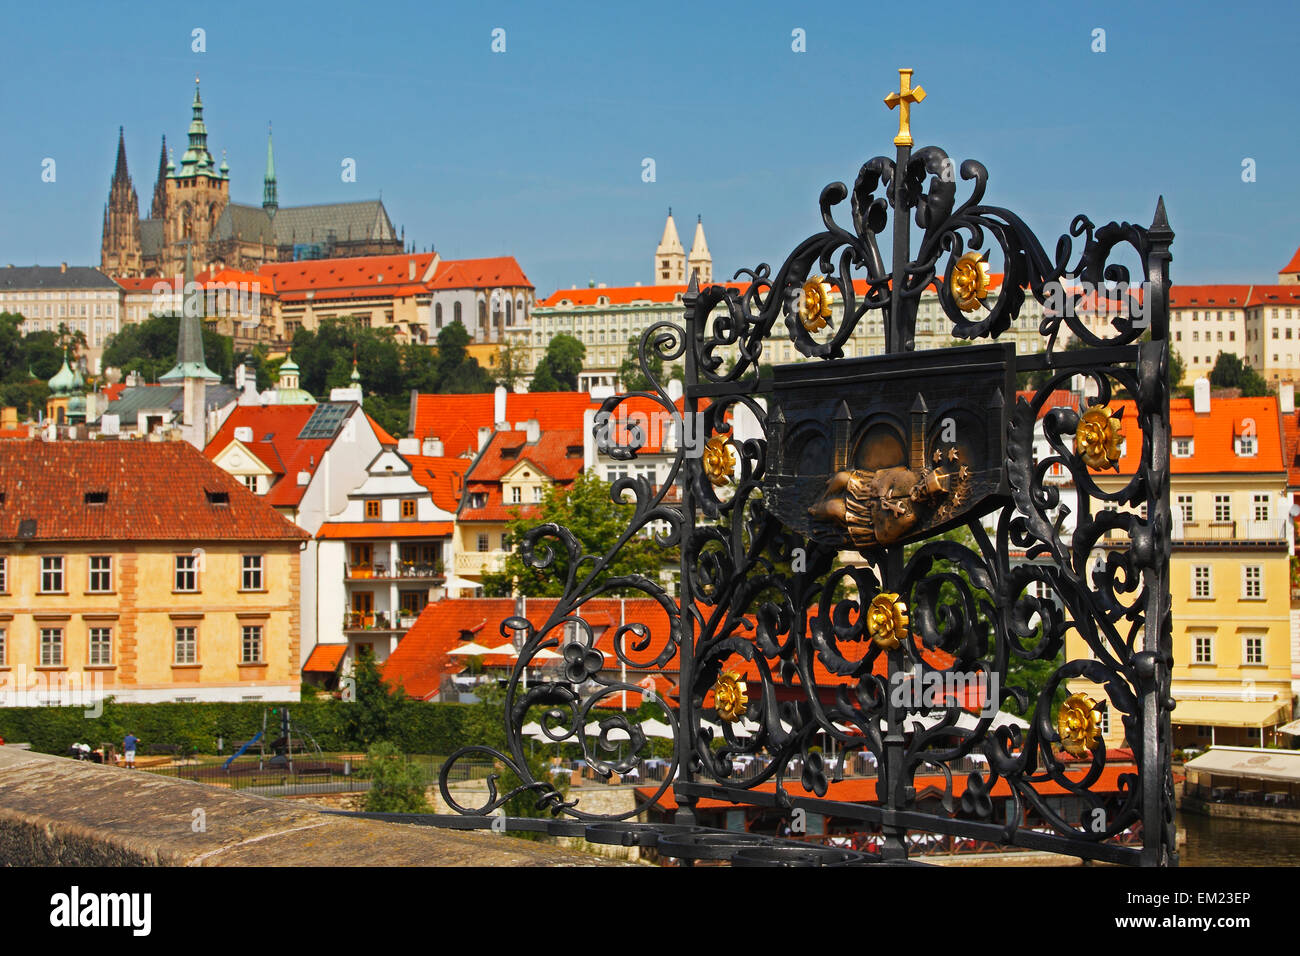 Bronze Relief On Charles Bridge Or Karluv Most With Royal Palace In The Background; Prague Czech Republic Stock Photo